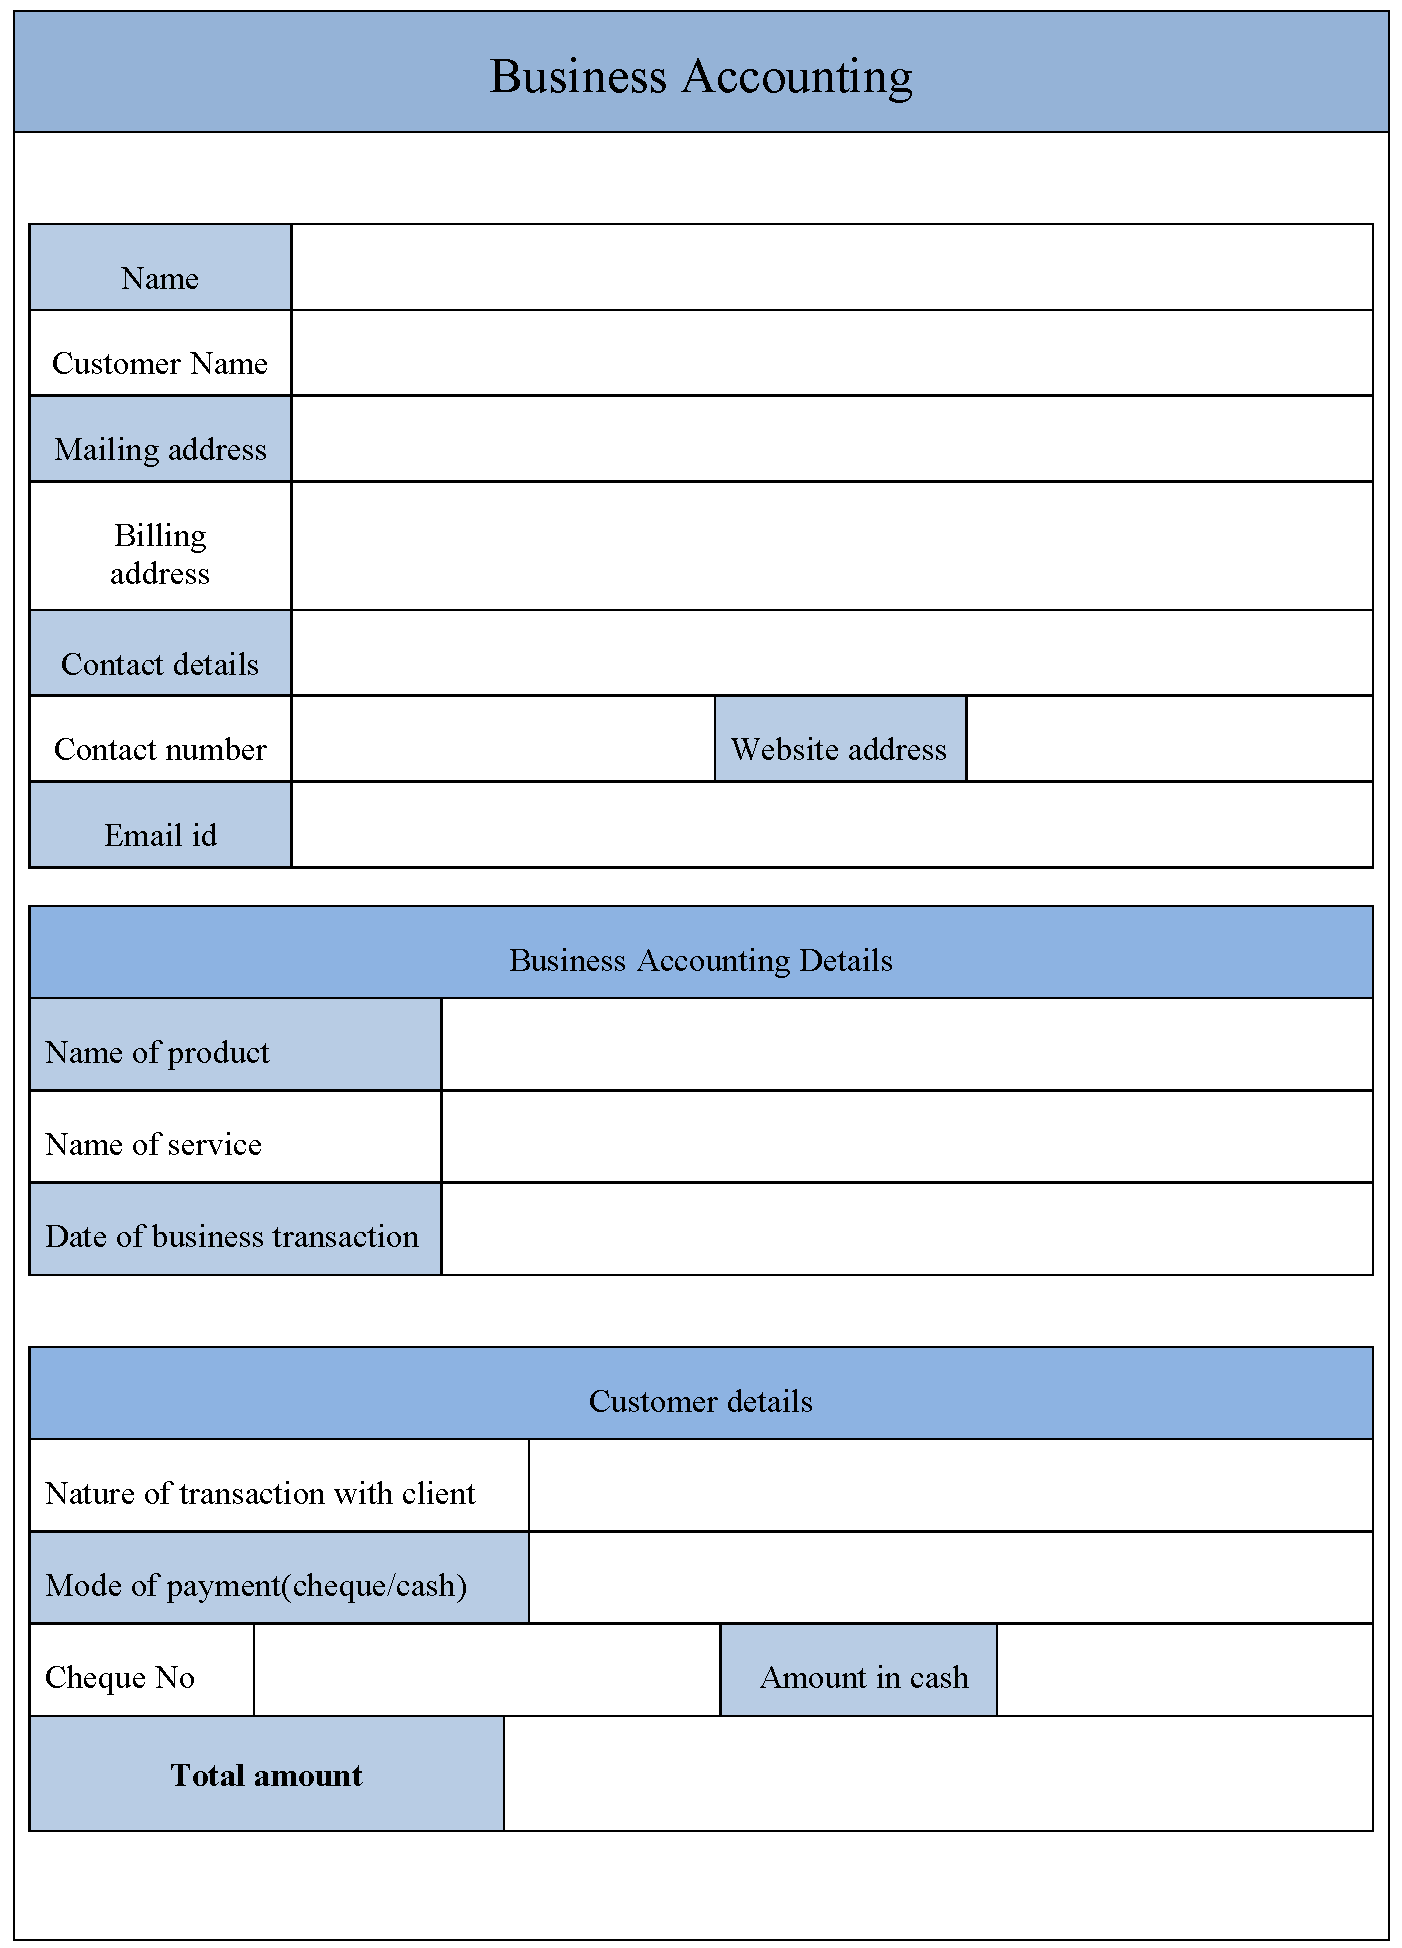 Business Accounting Form